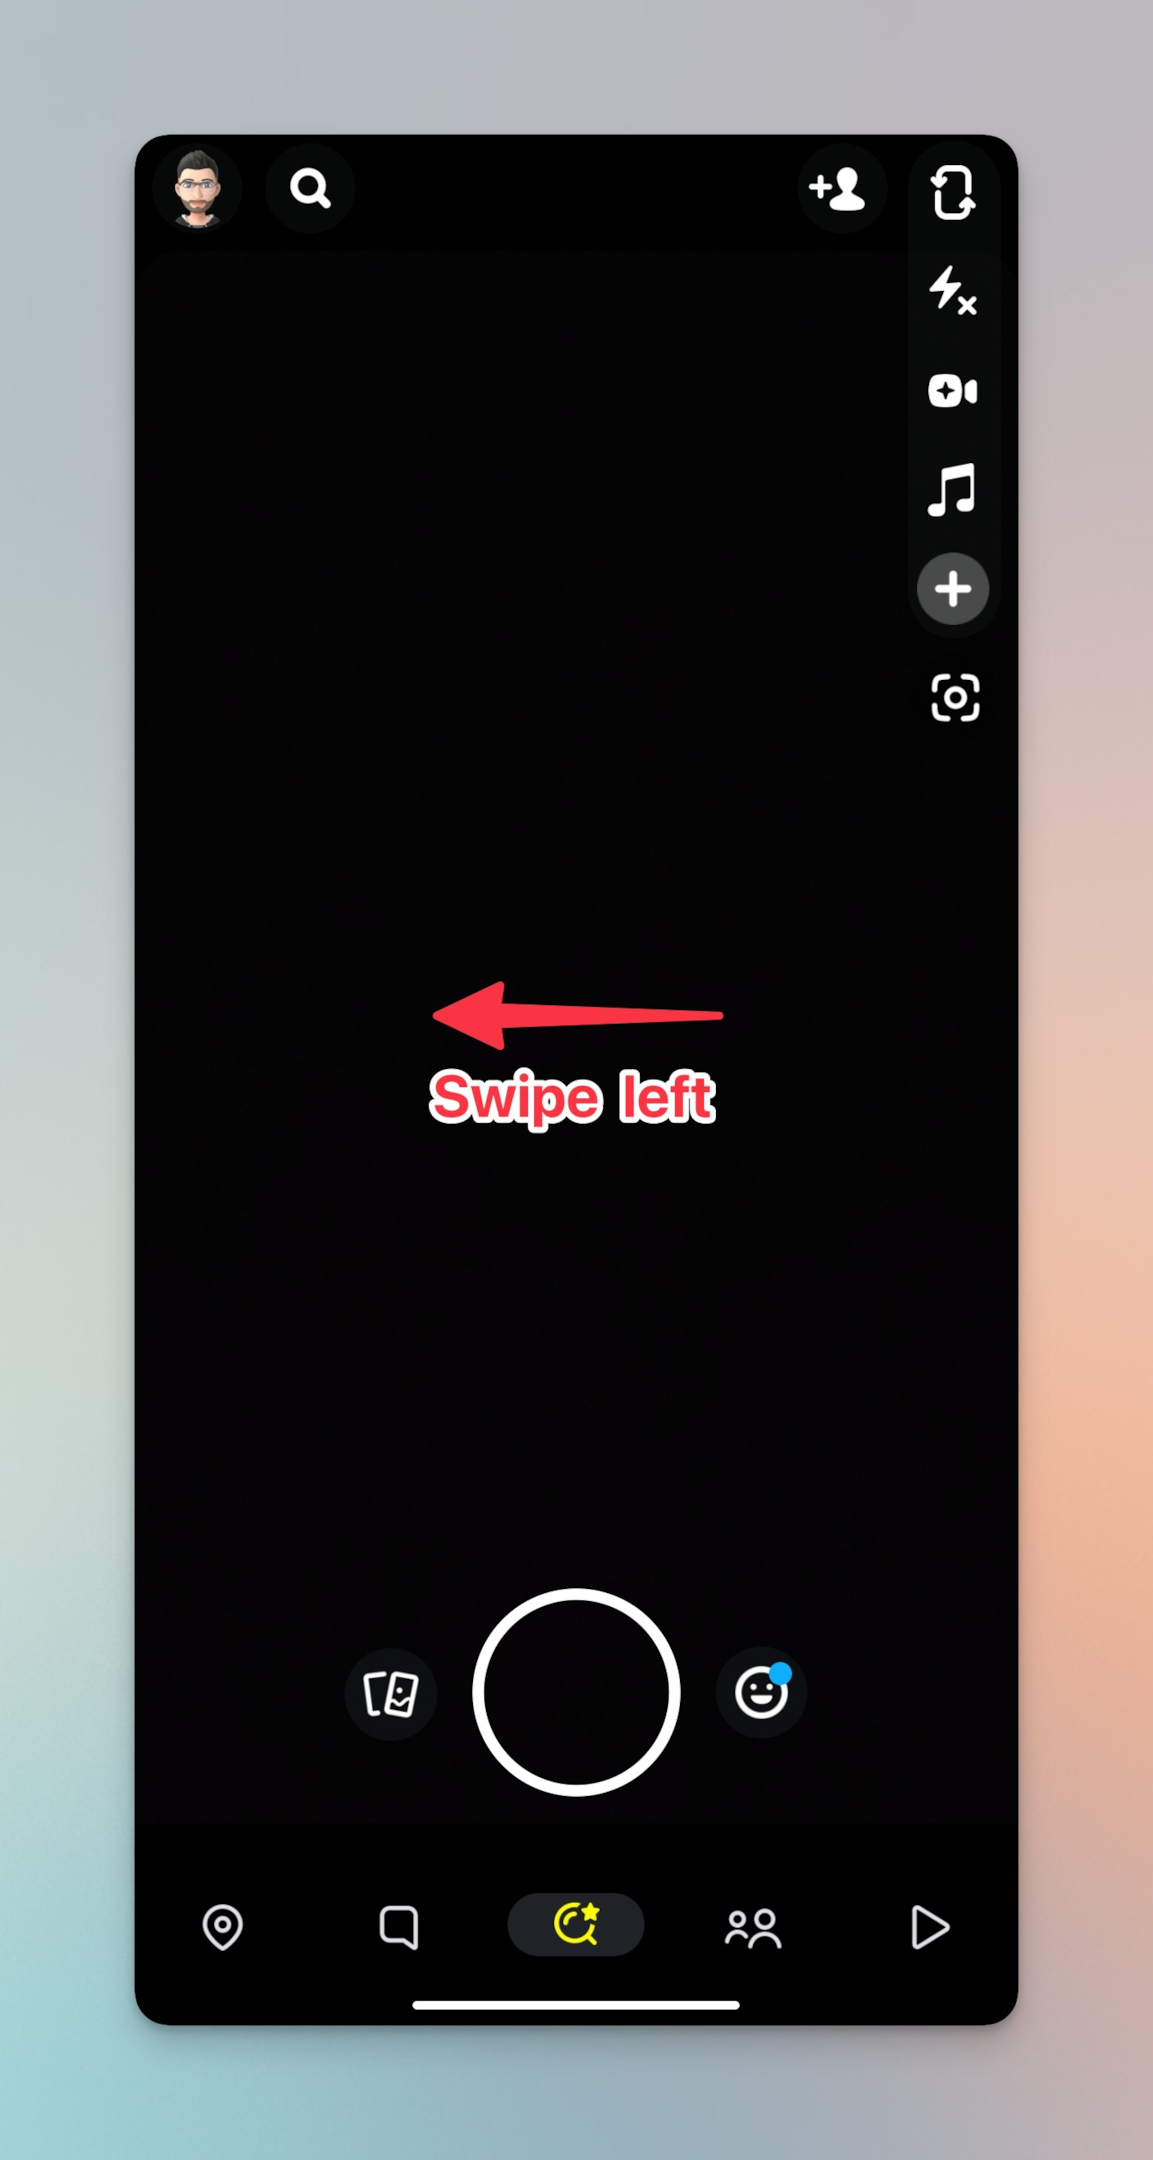 Remote.tools shows how to open discover page on Snapchat app for android